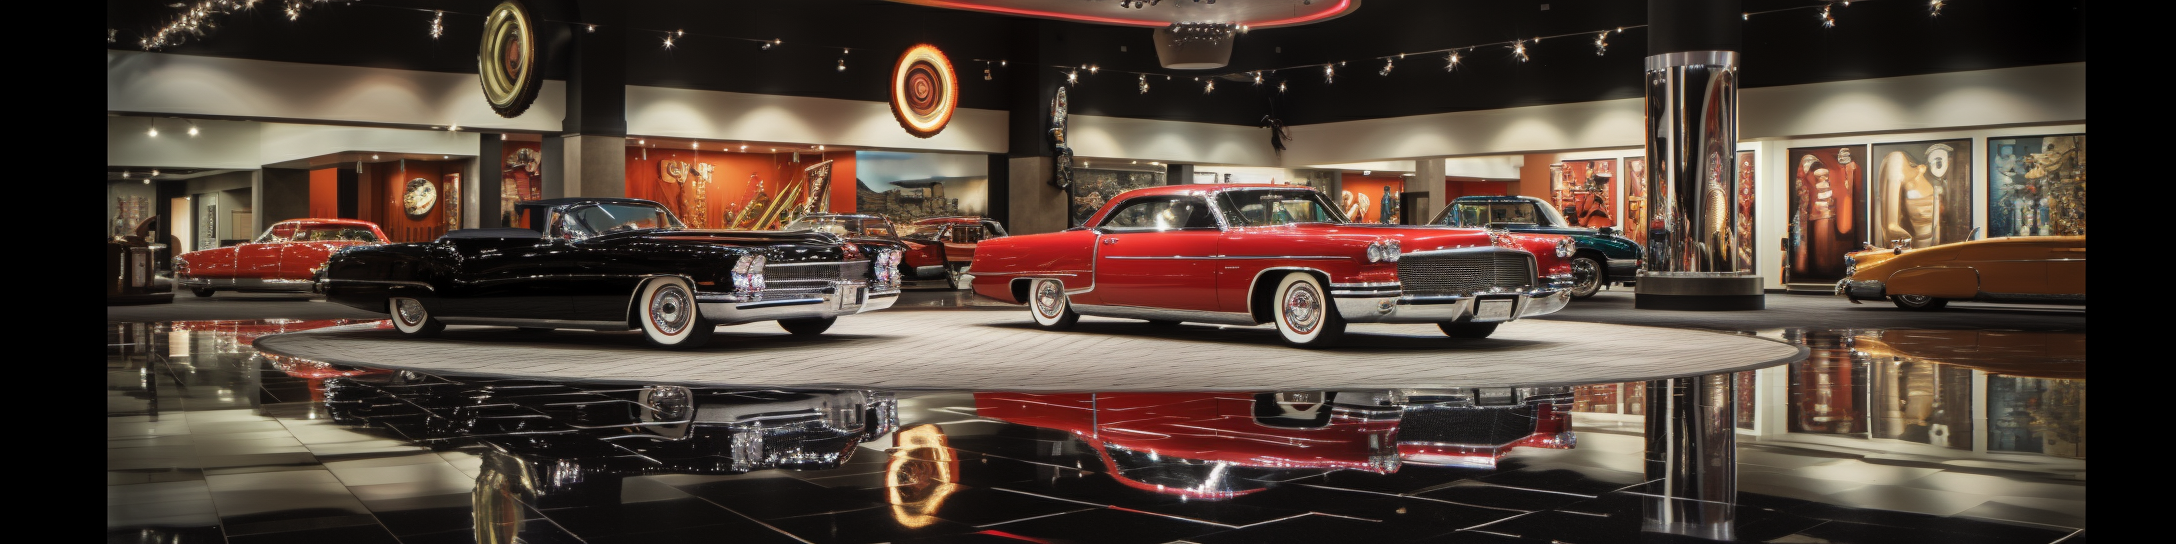 Carpet Cleaning for Automotive Showrooms: Presenting Pristine Vehicles